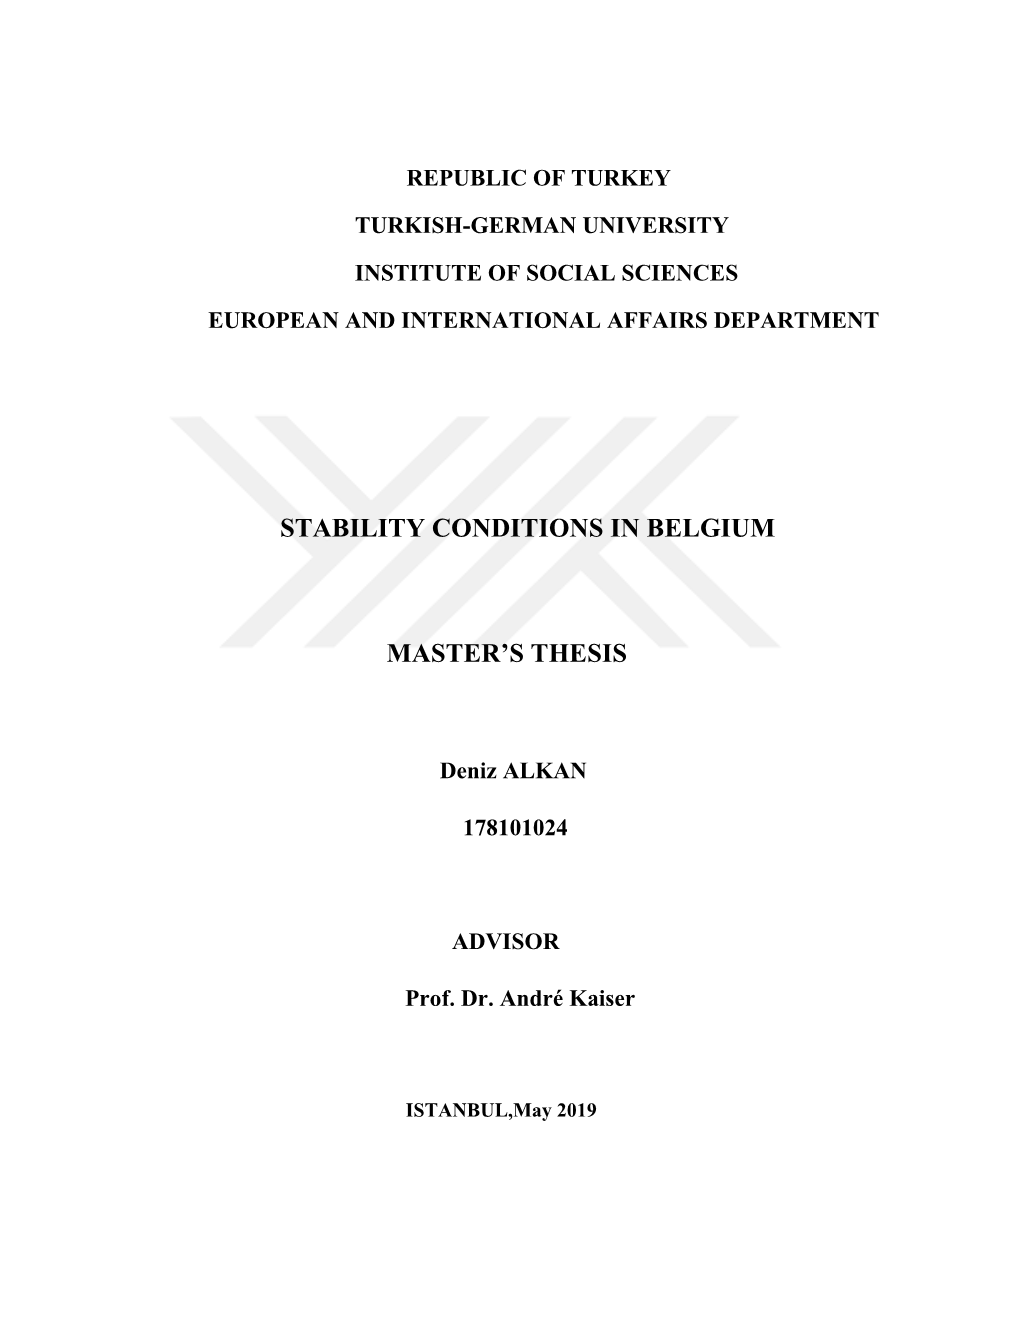 Stability Conditions in Belgium Master's Thesis